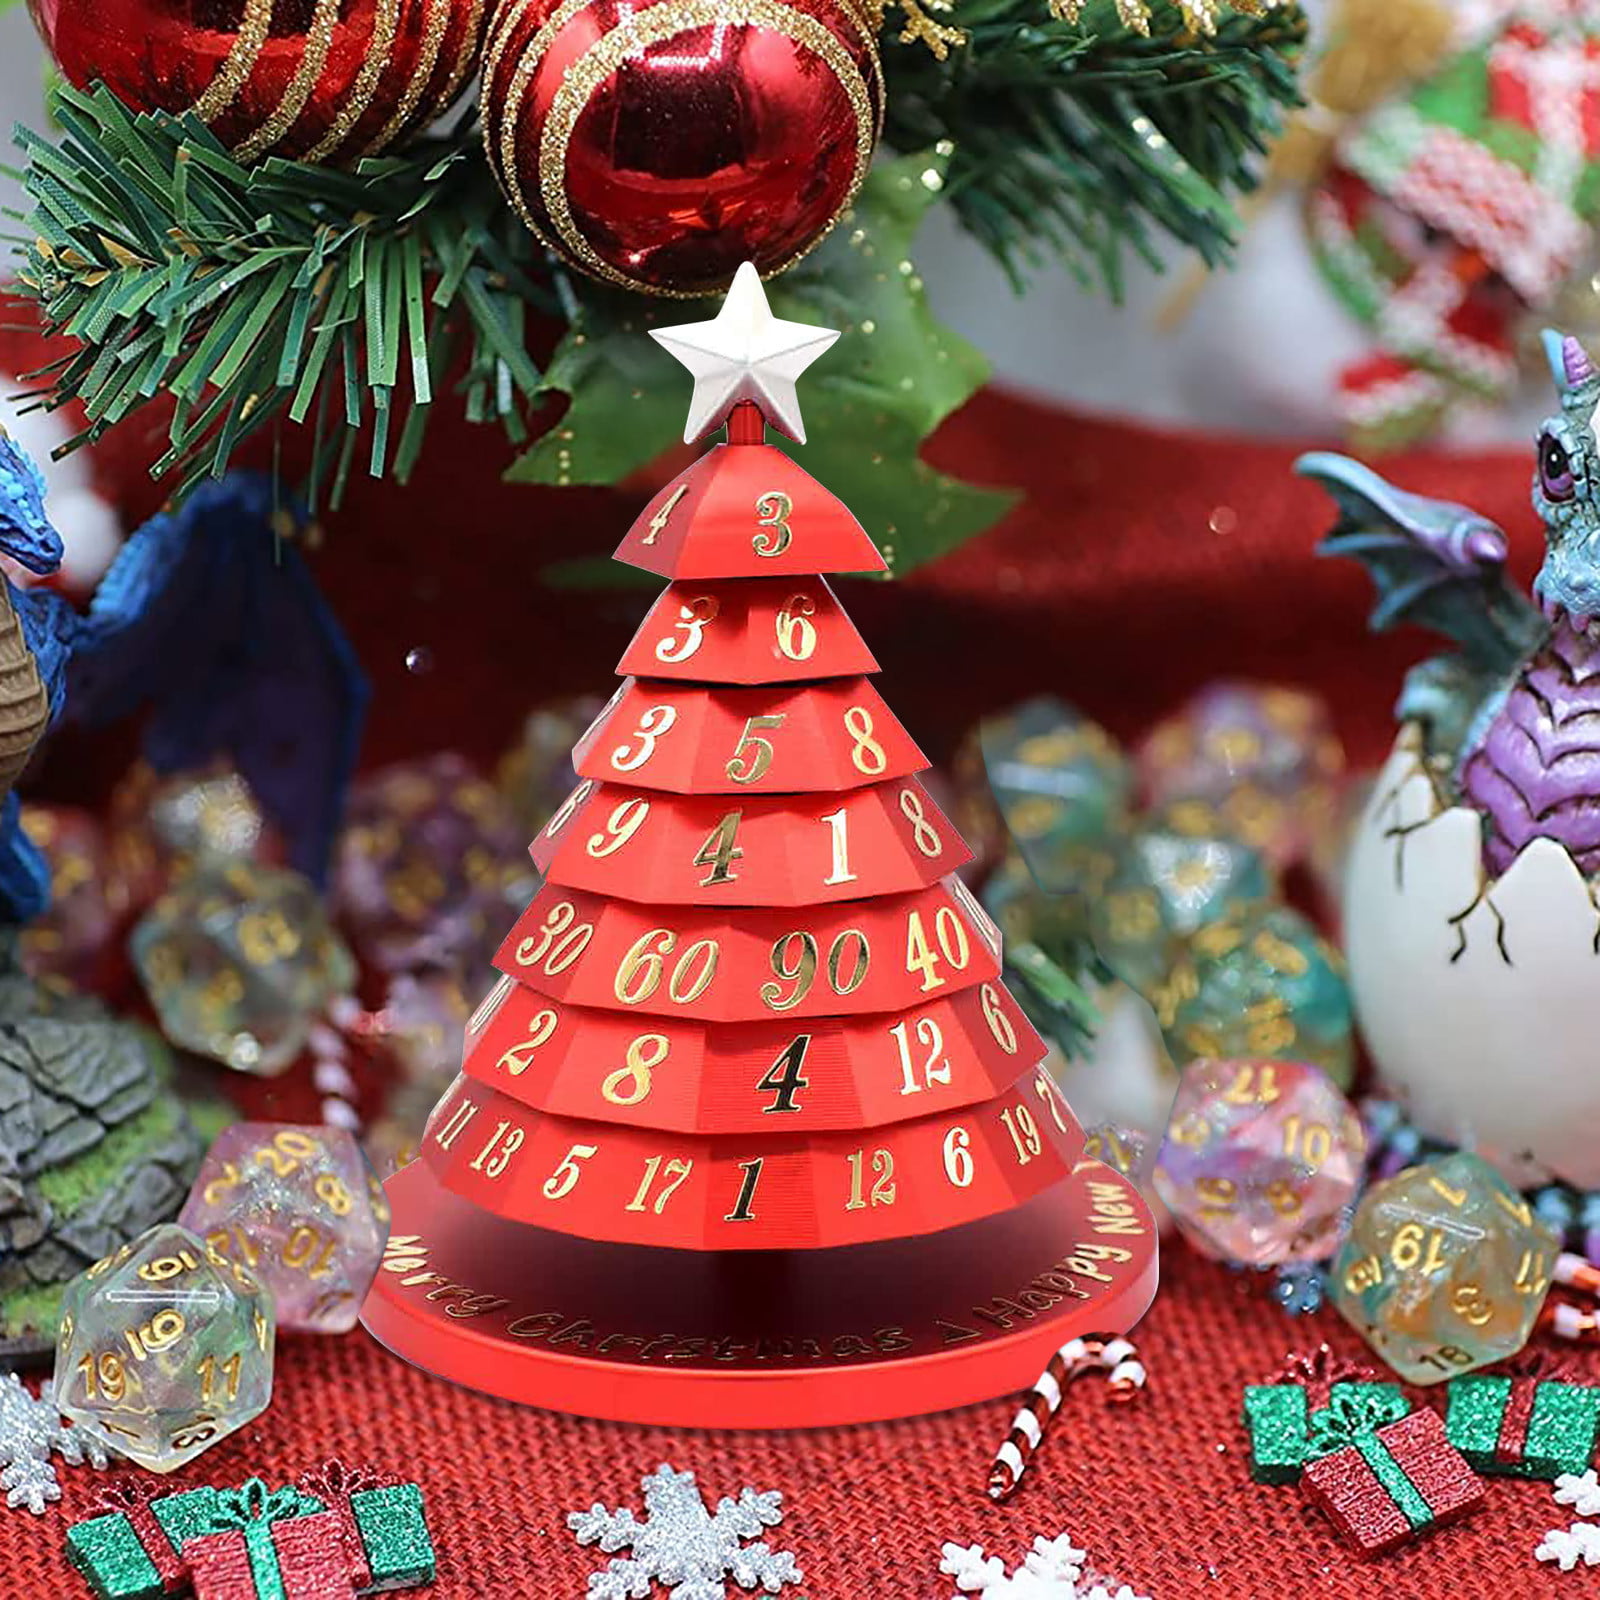 New Playing Dice Innovative RPG Dice,2021 Newest Christmas Tree Design Tabletop Gaming for Family Fun A Tabletop Dice Gaming Christmas Tree Dice Set 